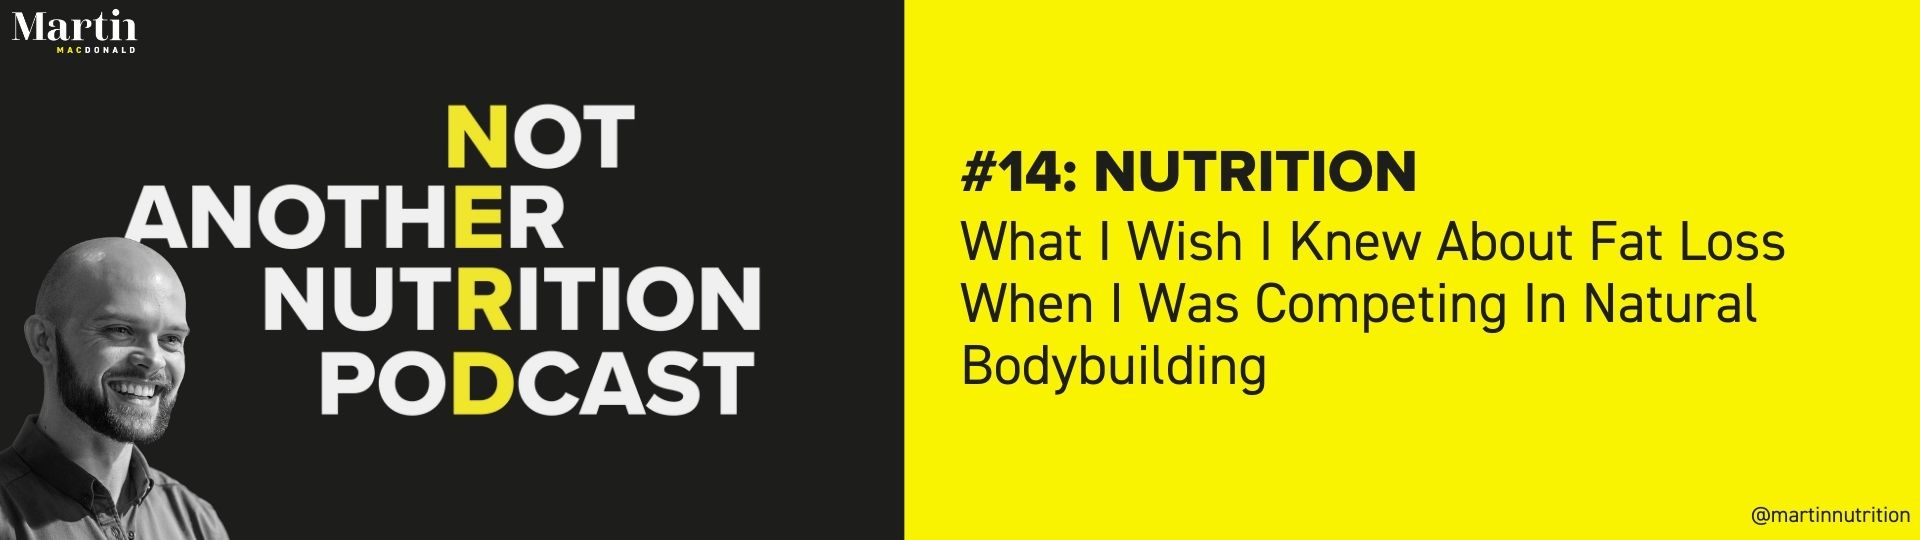 What I Wish I Knew About Fat Loss When I Was Competing In Natural Bodybuilding